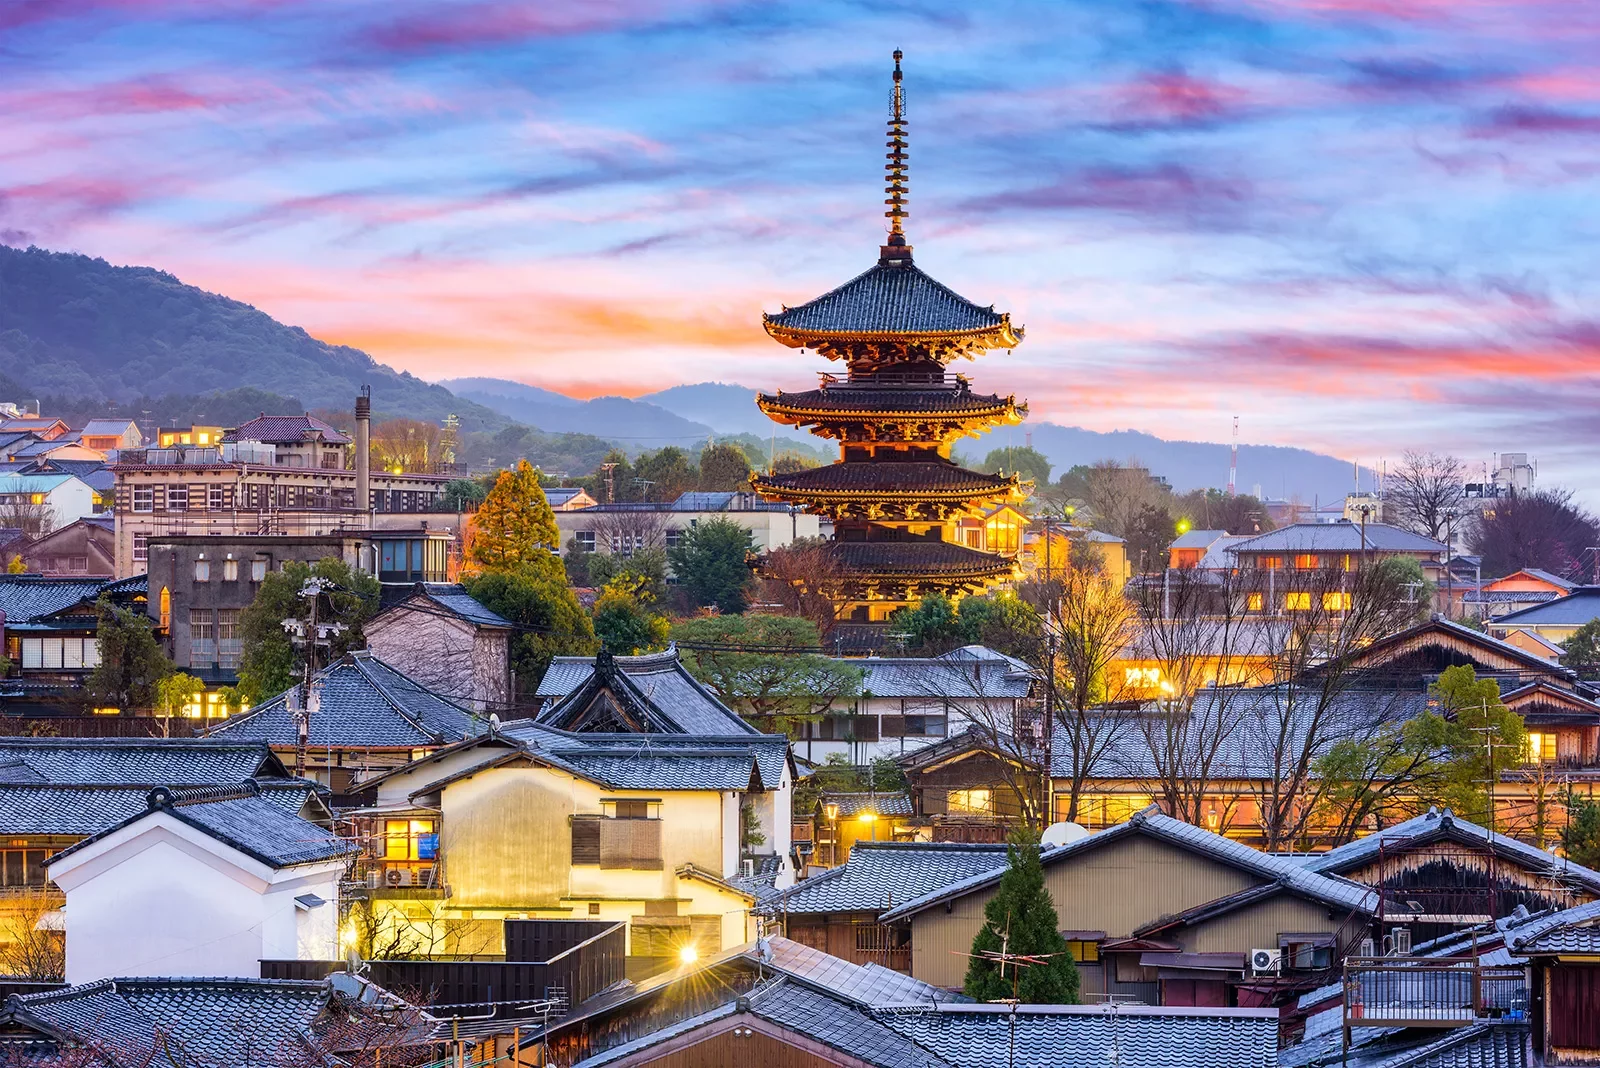 Japanese city of Kyoto at sunset